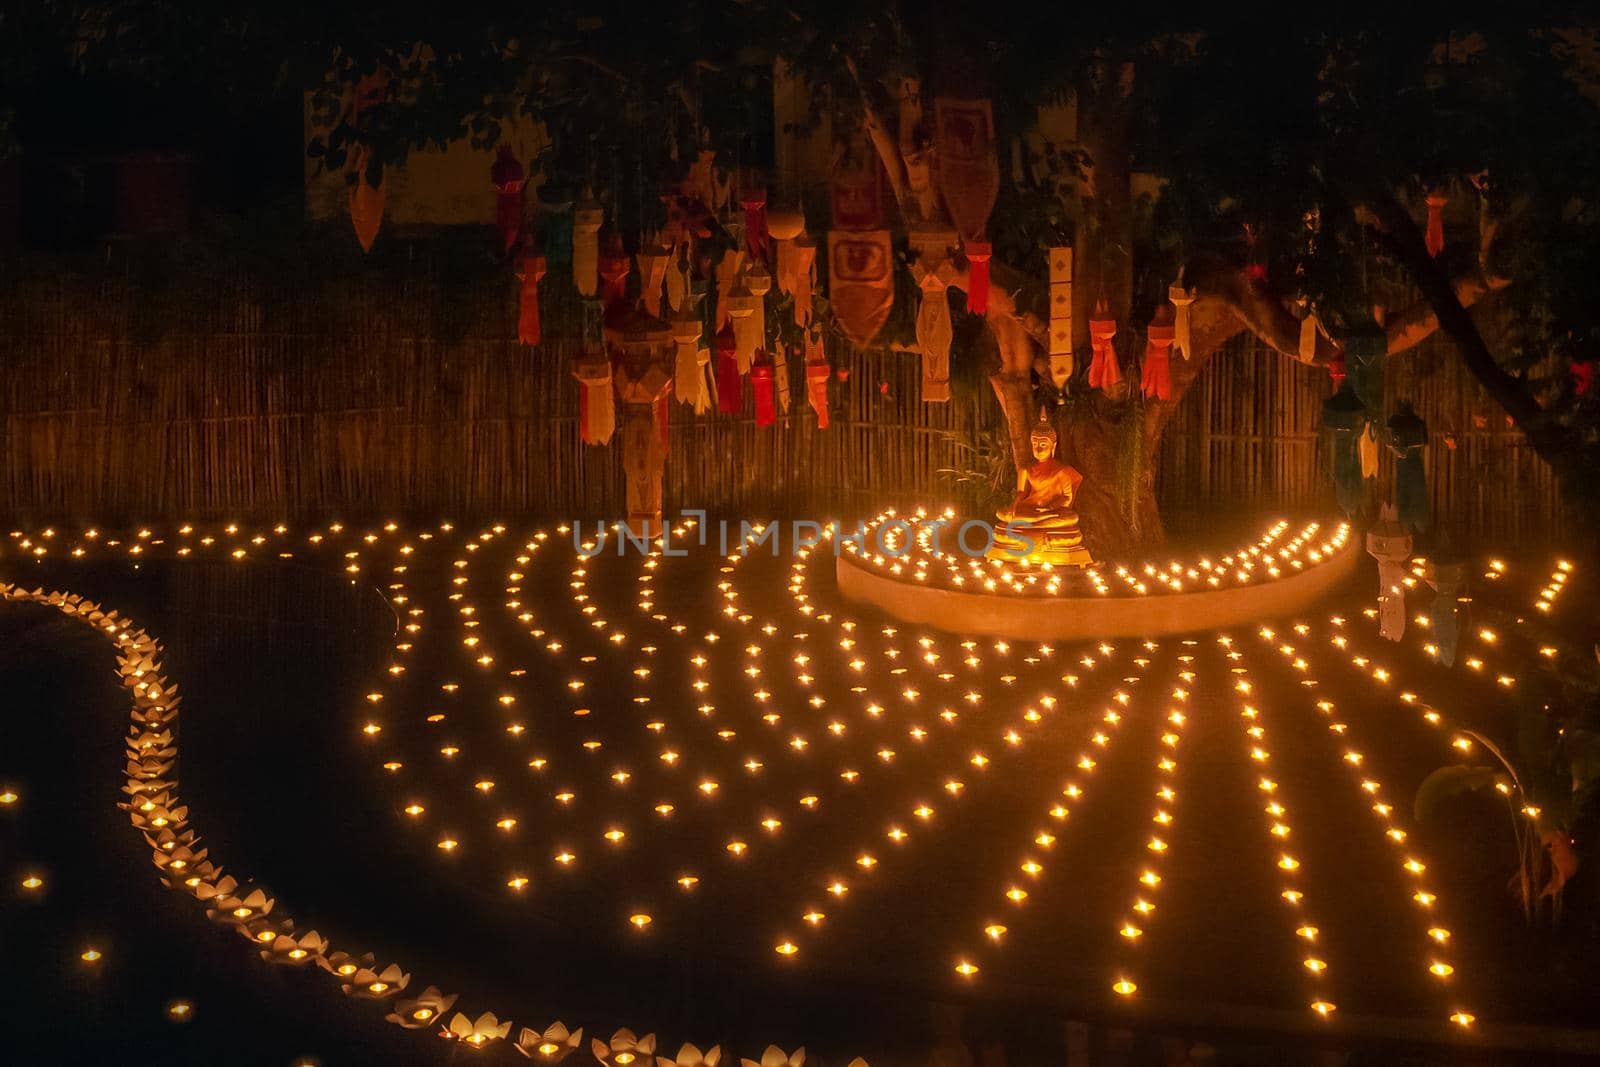 Loy Krathong festival ,Buddhist monk light candles to the Buddha in Phan-Tao Temple, Chiangmai, Thailand. by toa55